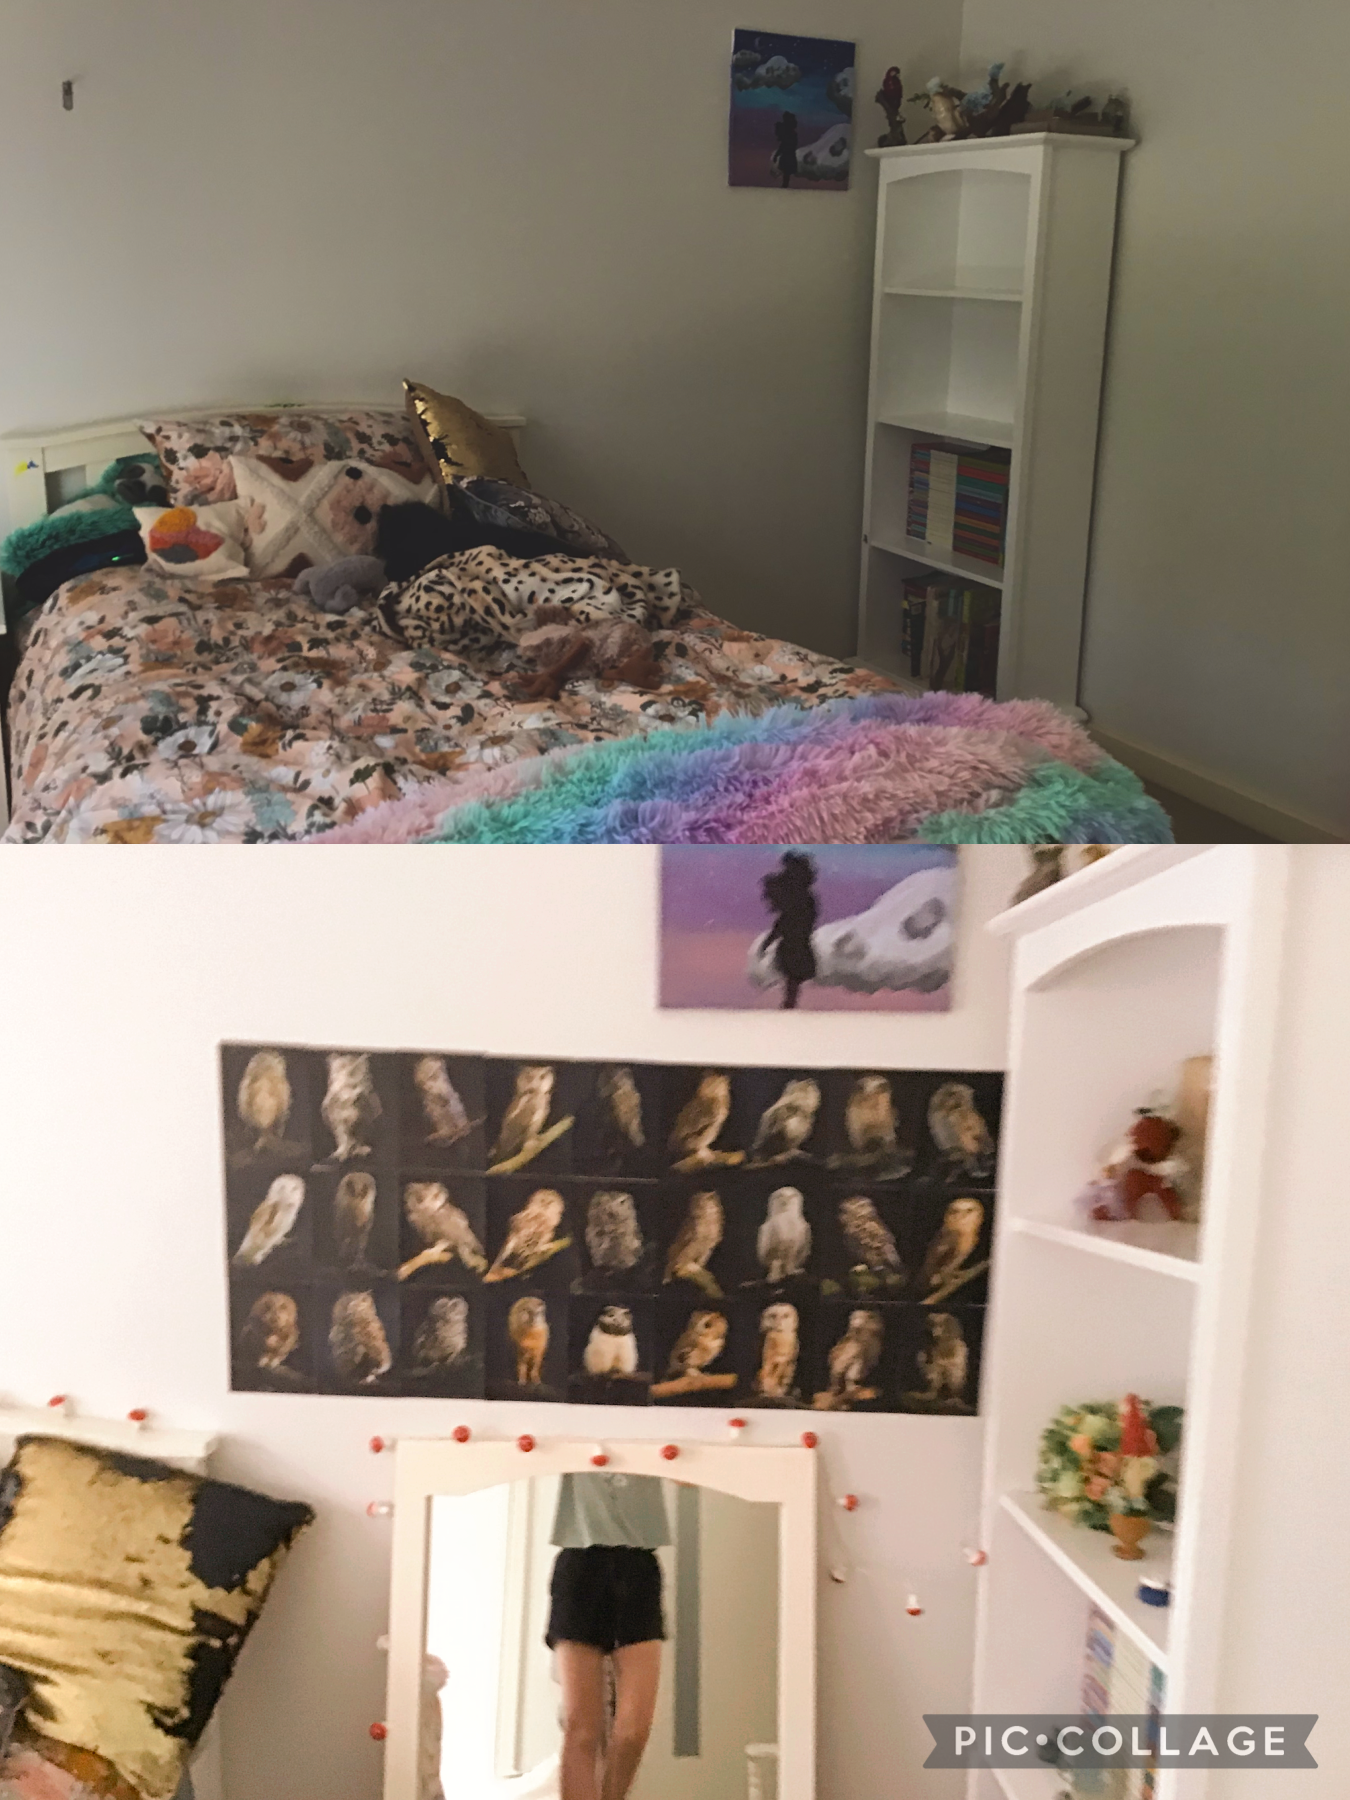 My new room 💕 room makeover, bed, mirror, bookshelf, cabinet, pillows, blankets, lights, birds, wall collage.